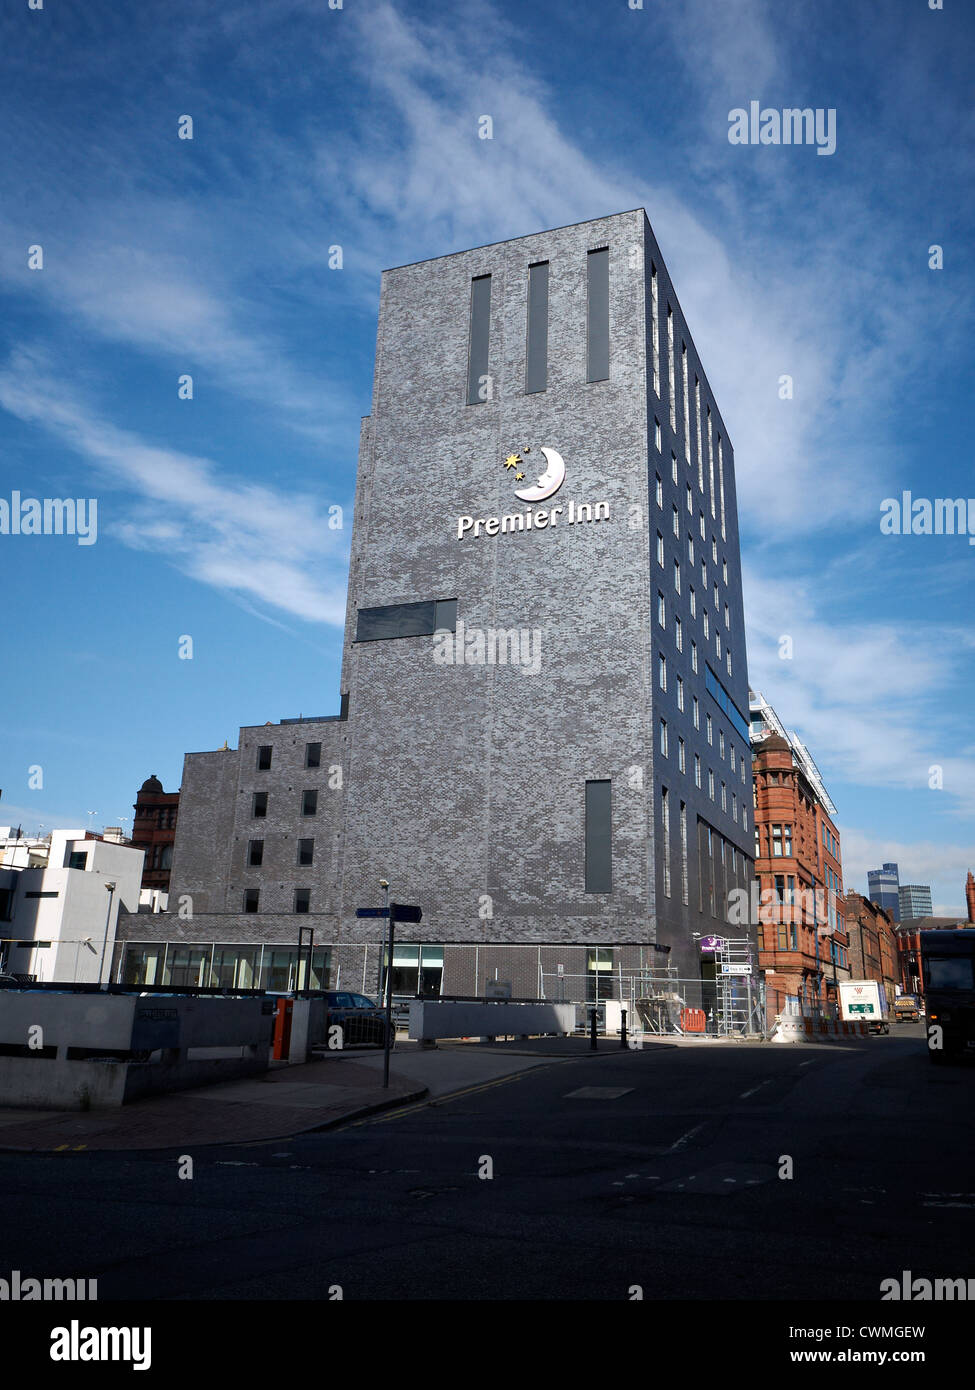 Premier Inn Hotel on Piccadilly, Dale Street in Manchester UK Stock Photo